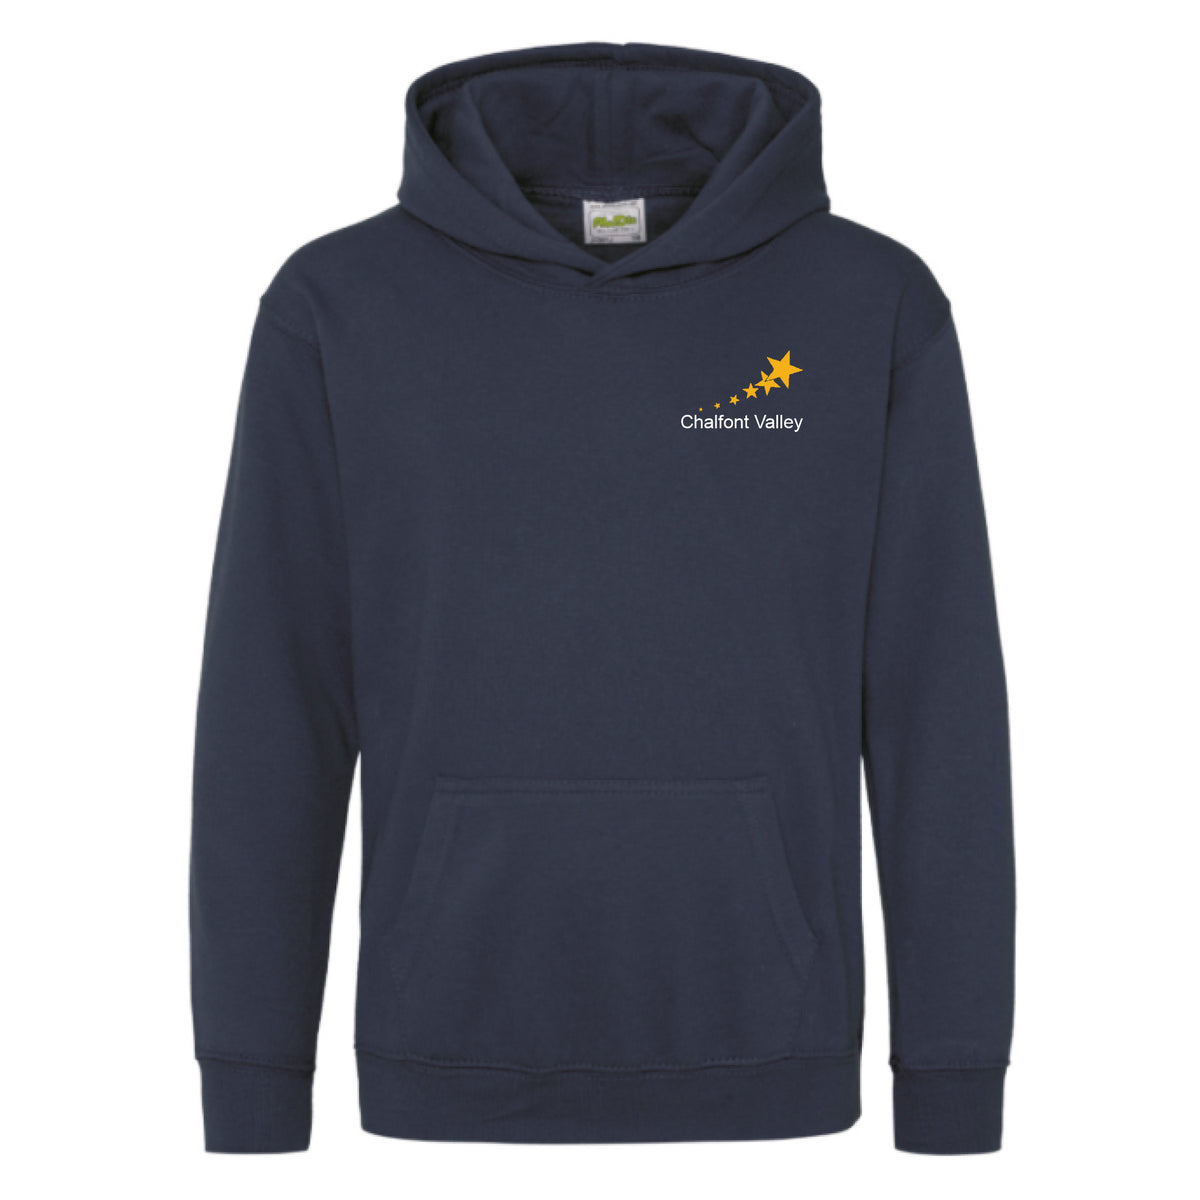 Chalfont Valley School Leavers Hoodie: French Navy